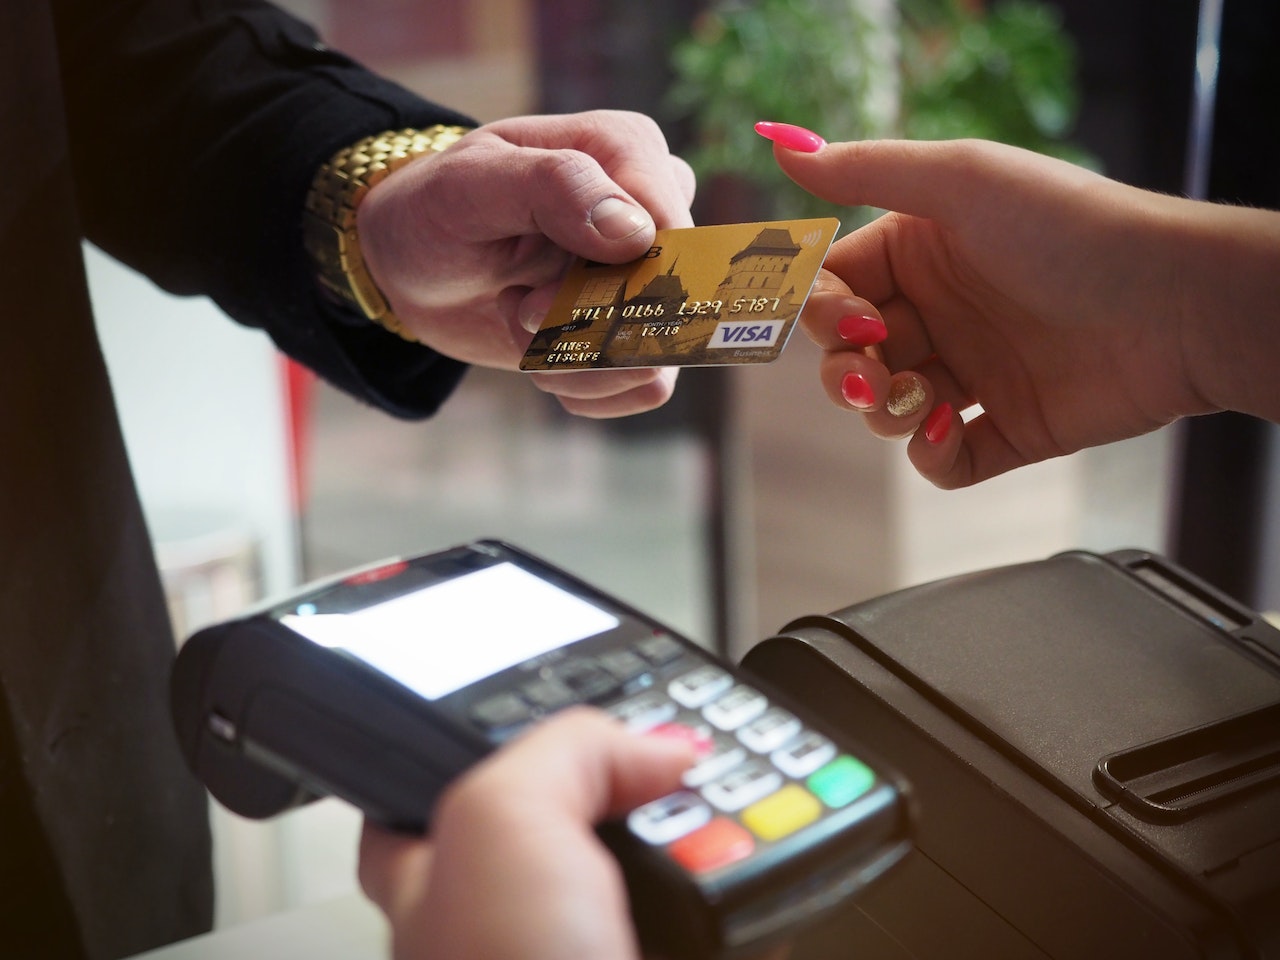 A male customer holding a credit card near NFC terminal makes a contactless payment to Gateway Processing